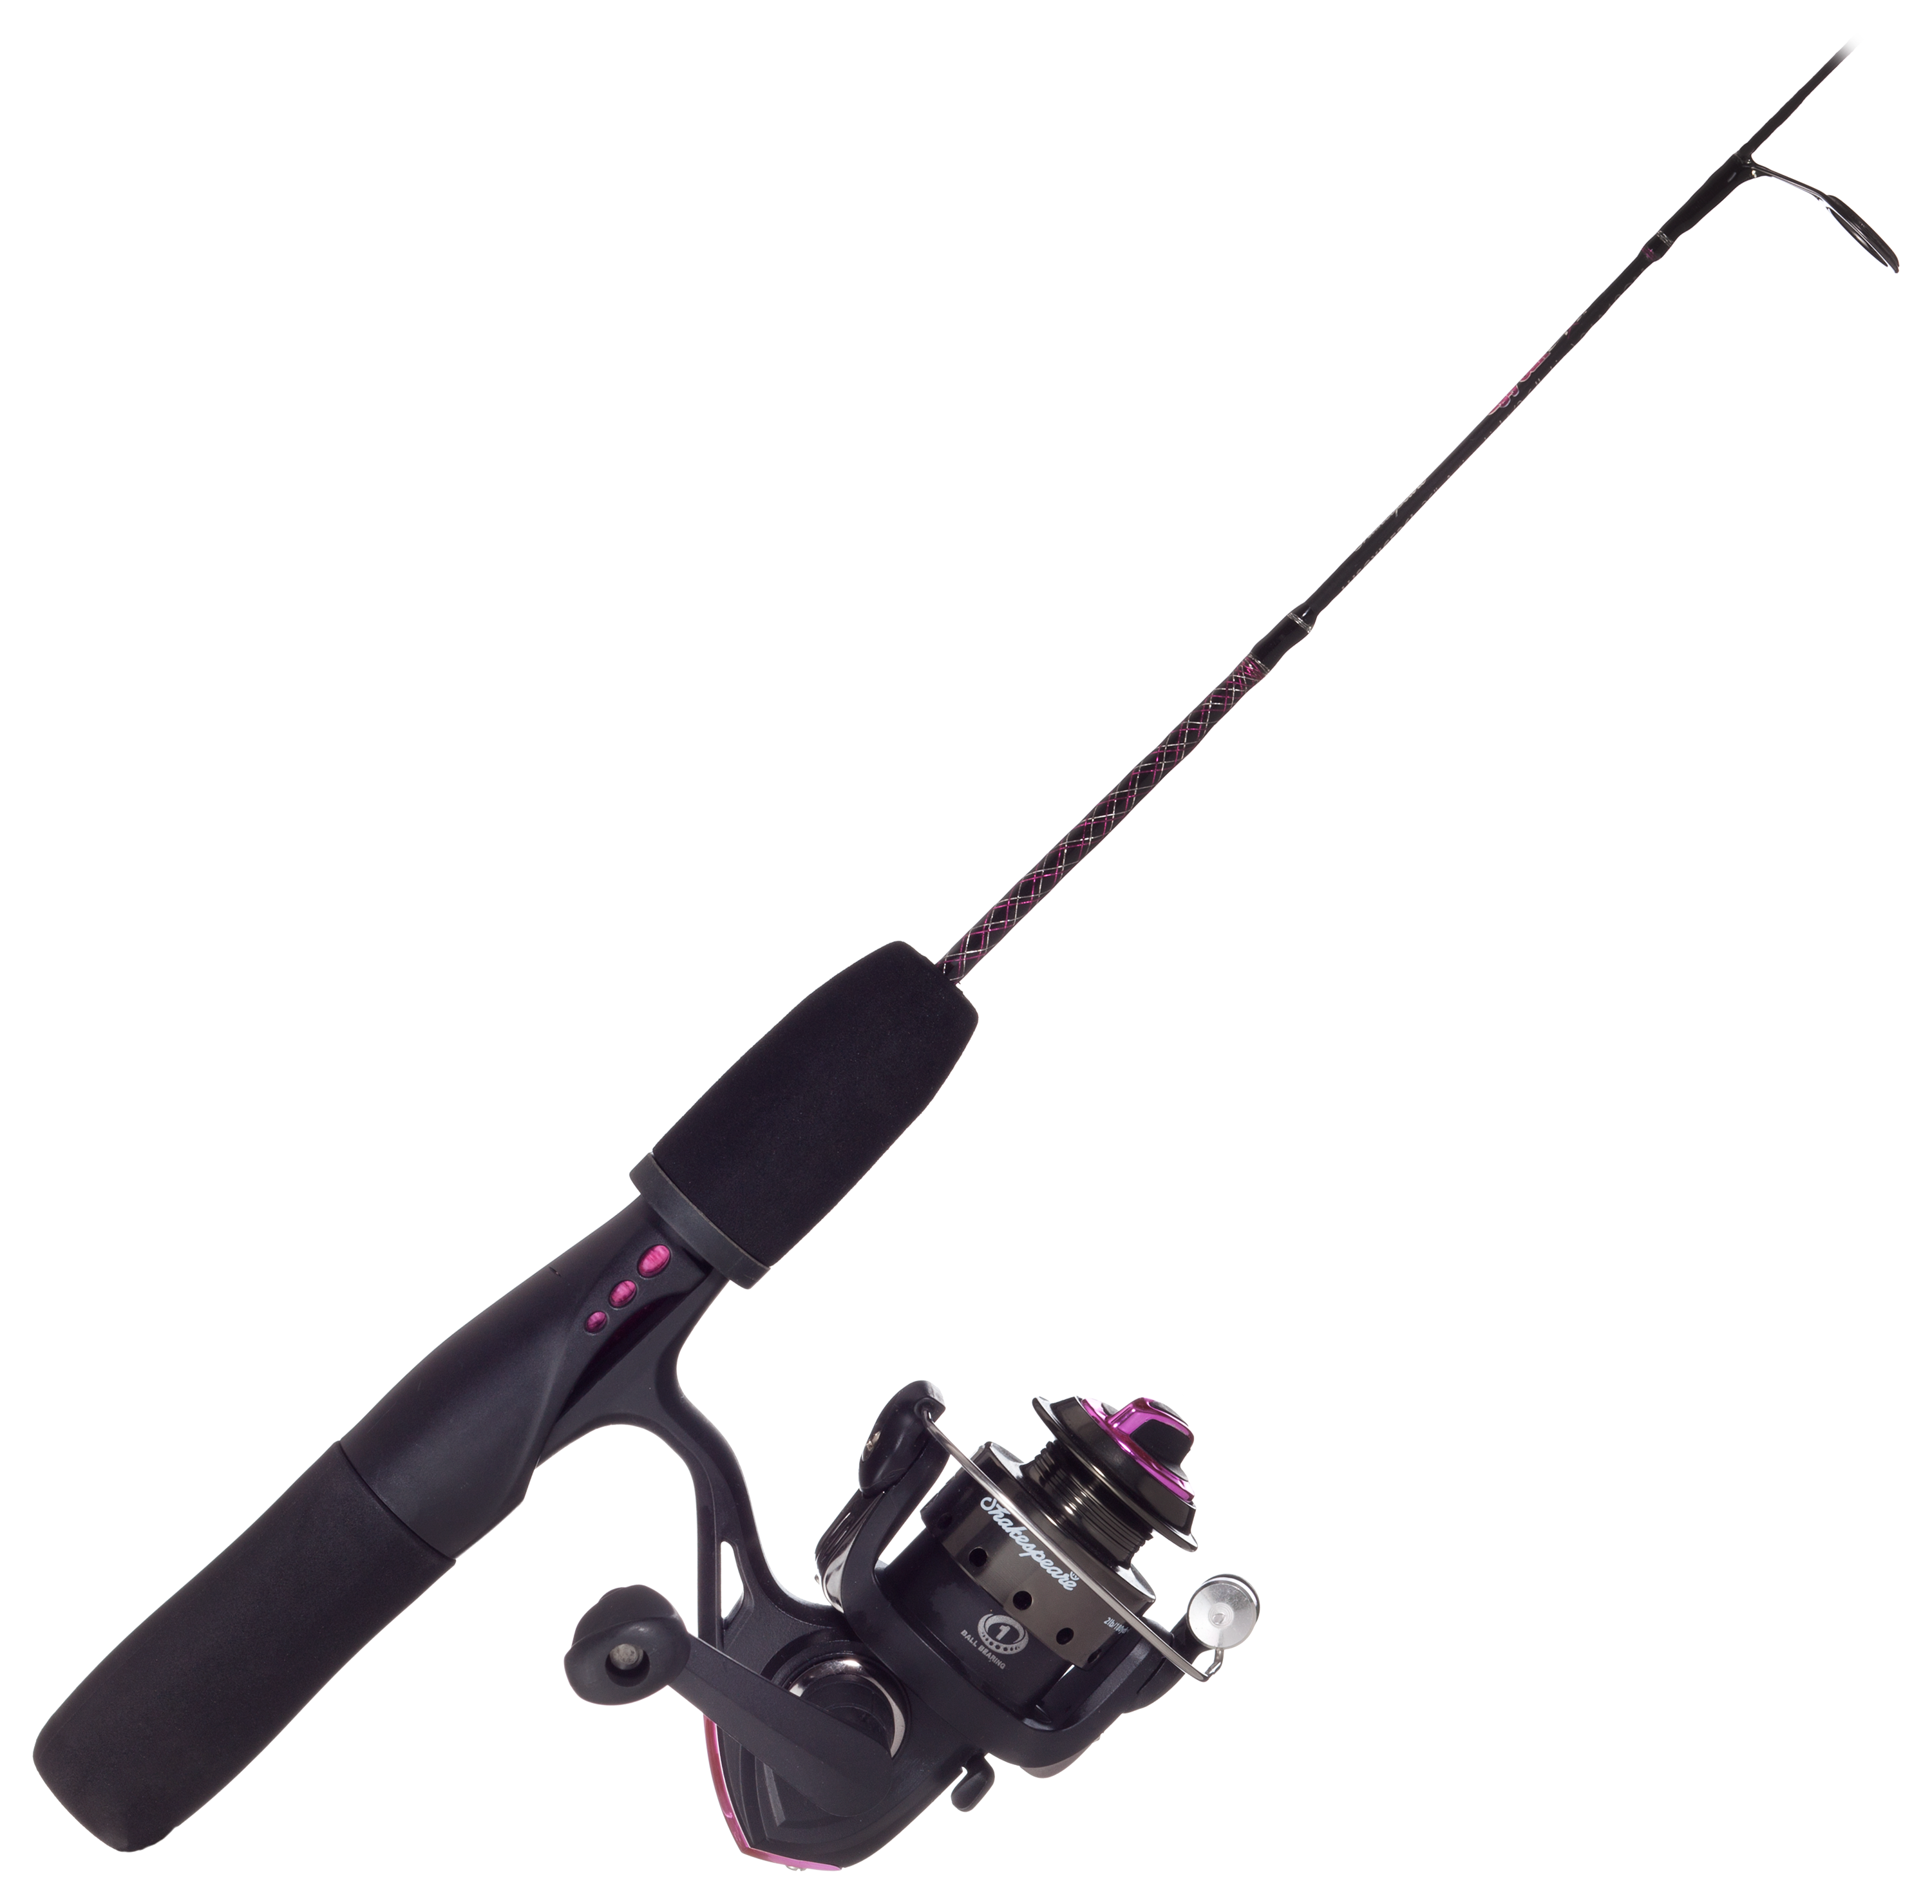 Ugly Stik GX2 Spinning Fishing Rod Review: Why It's Best Selling Product? 